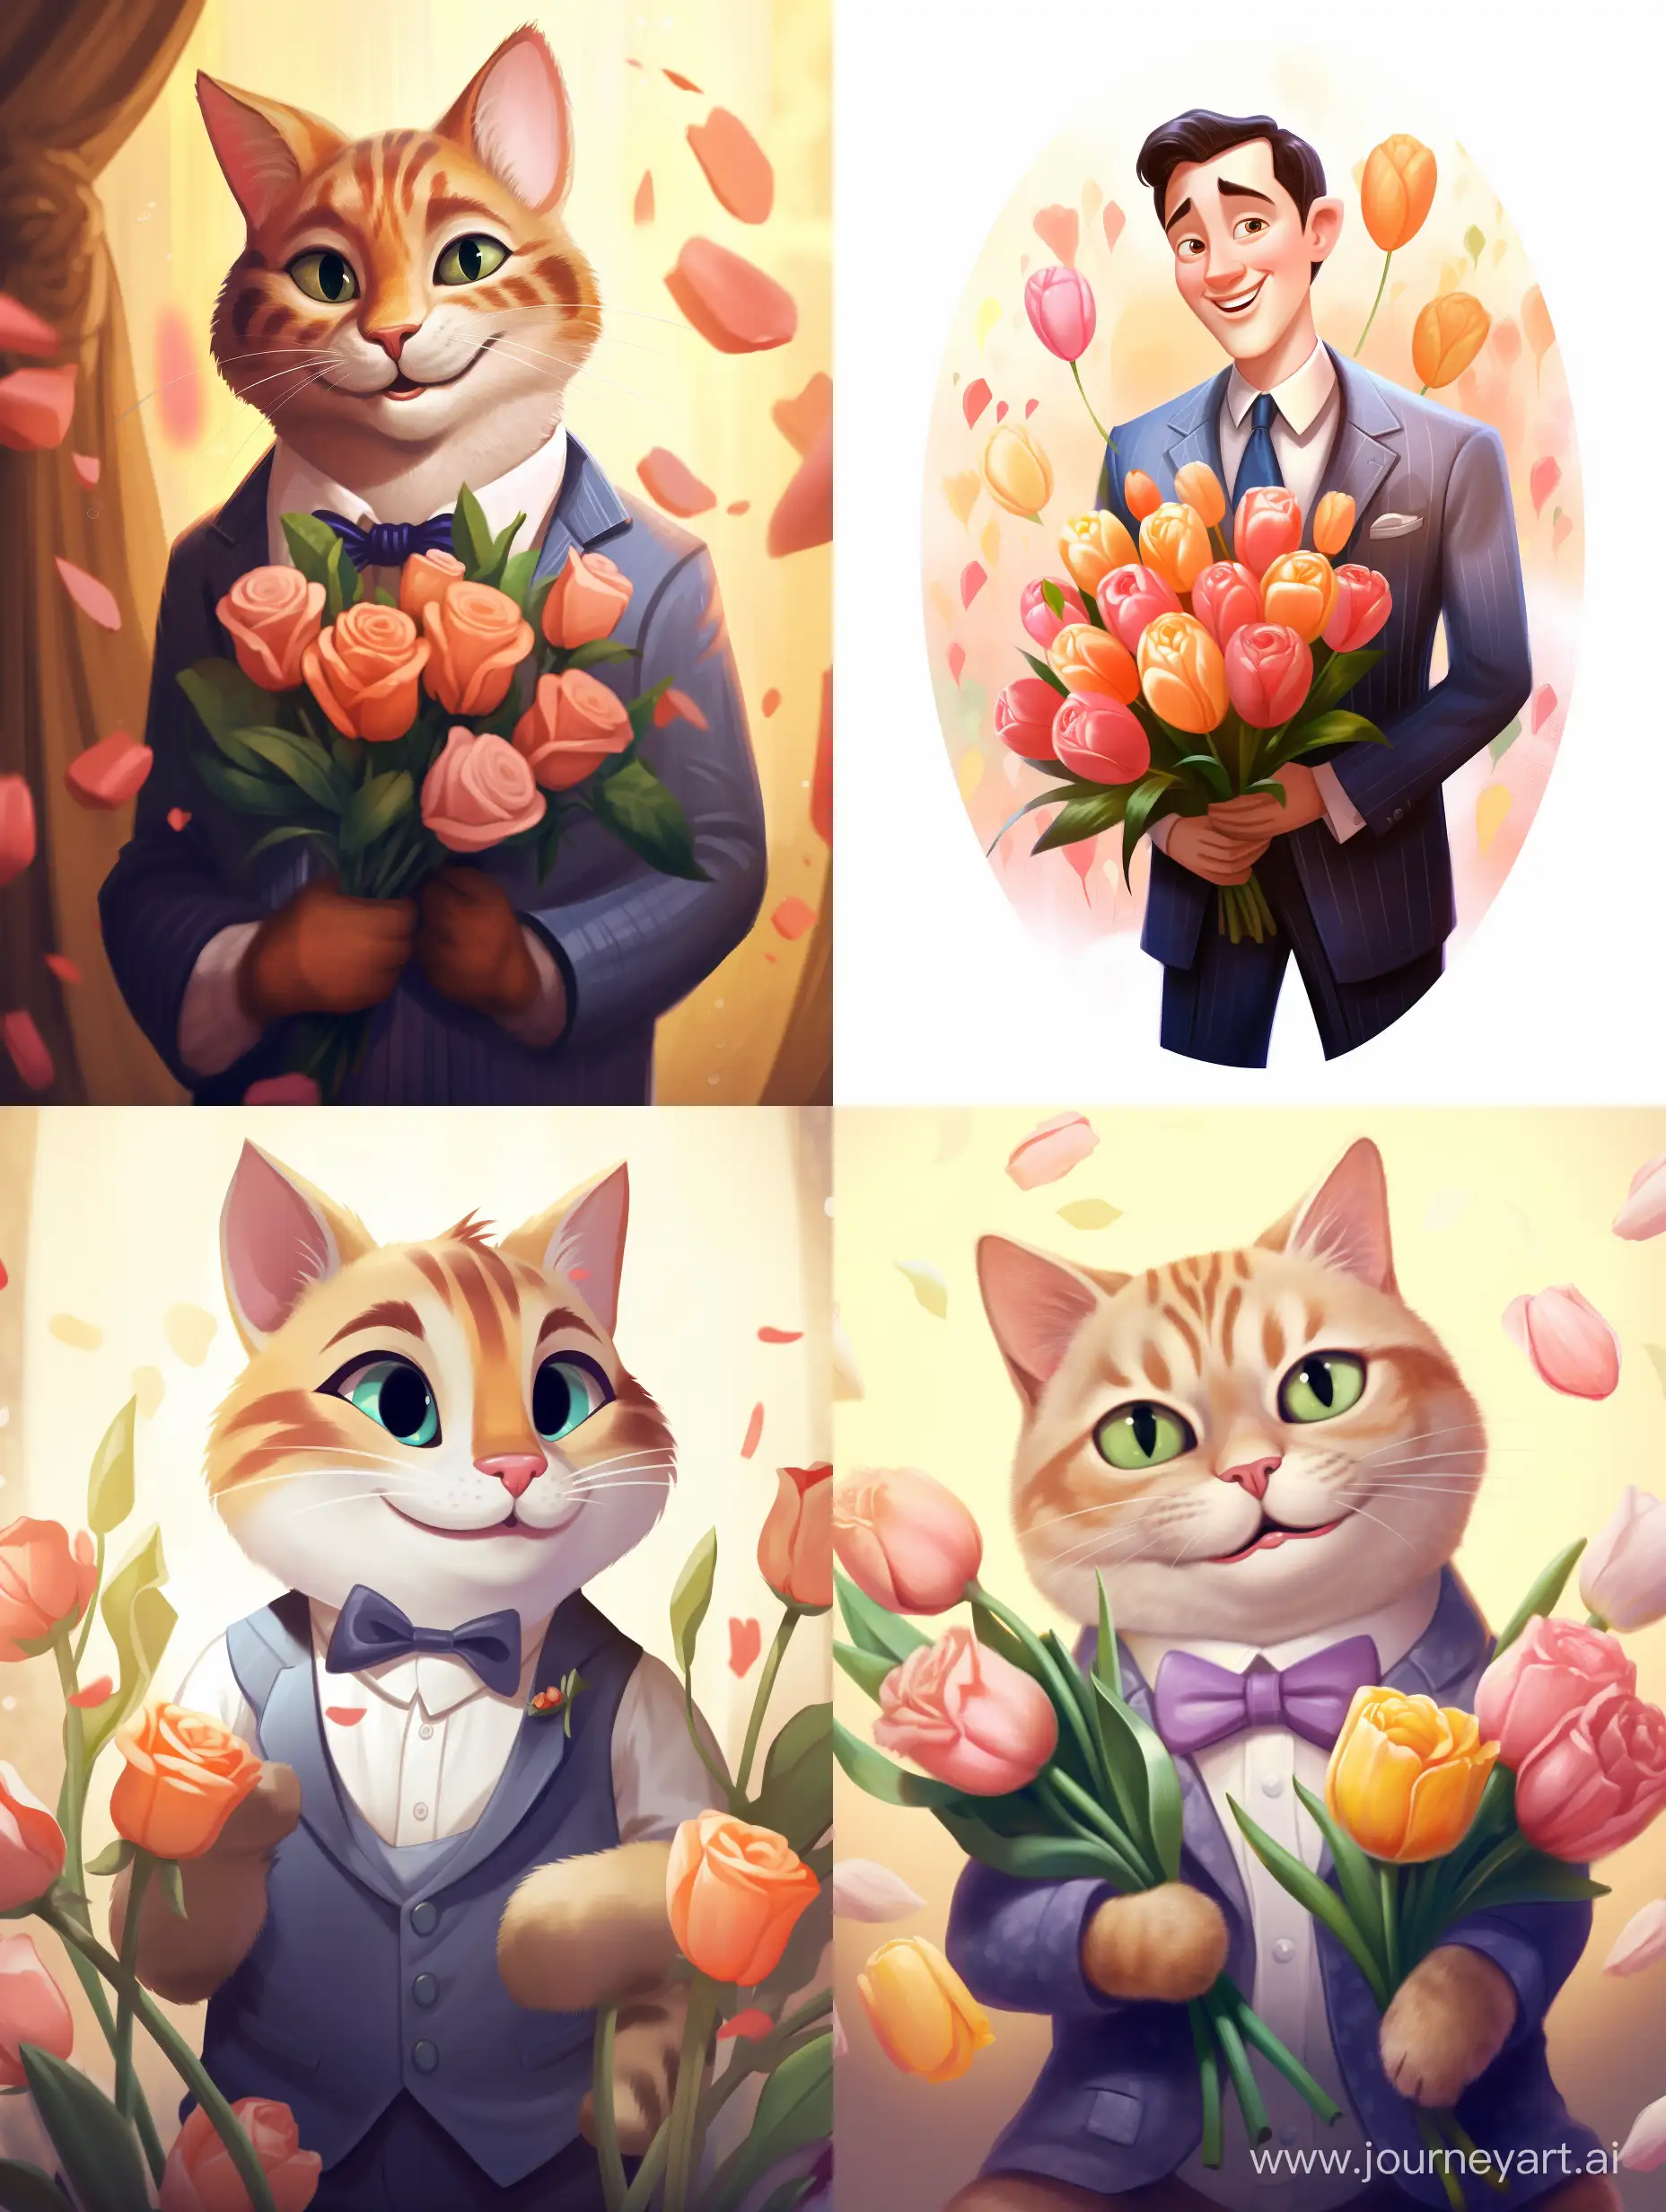 A Pixar-styled cat smiling in a men's suit with a tie holds a large bouquet of tulips in its paws. Pastel delicate tones.





